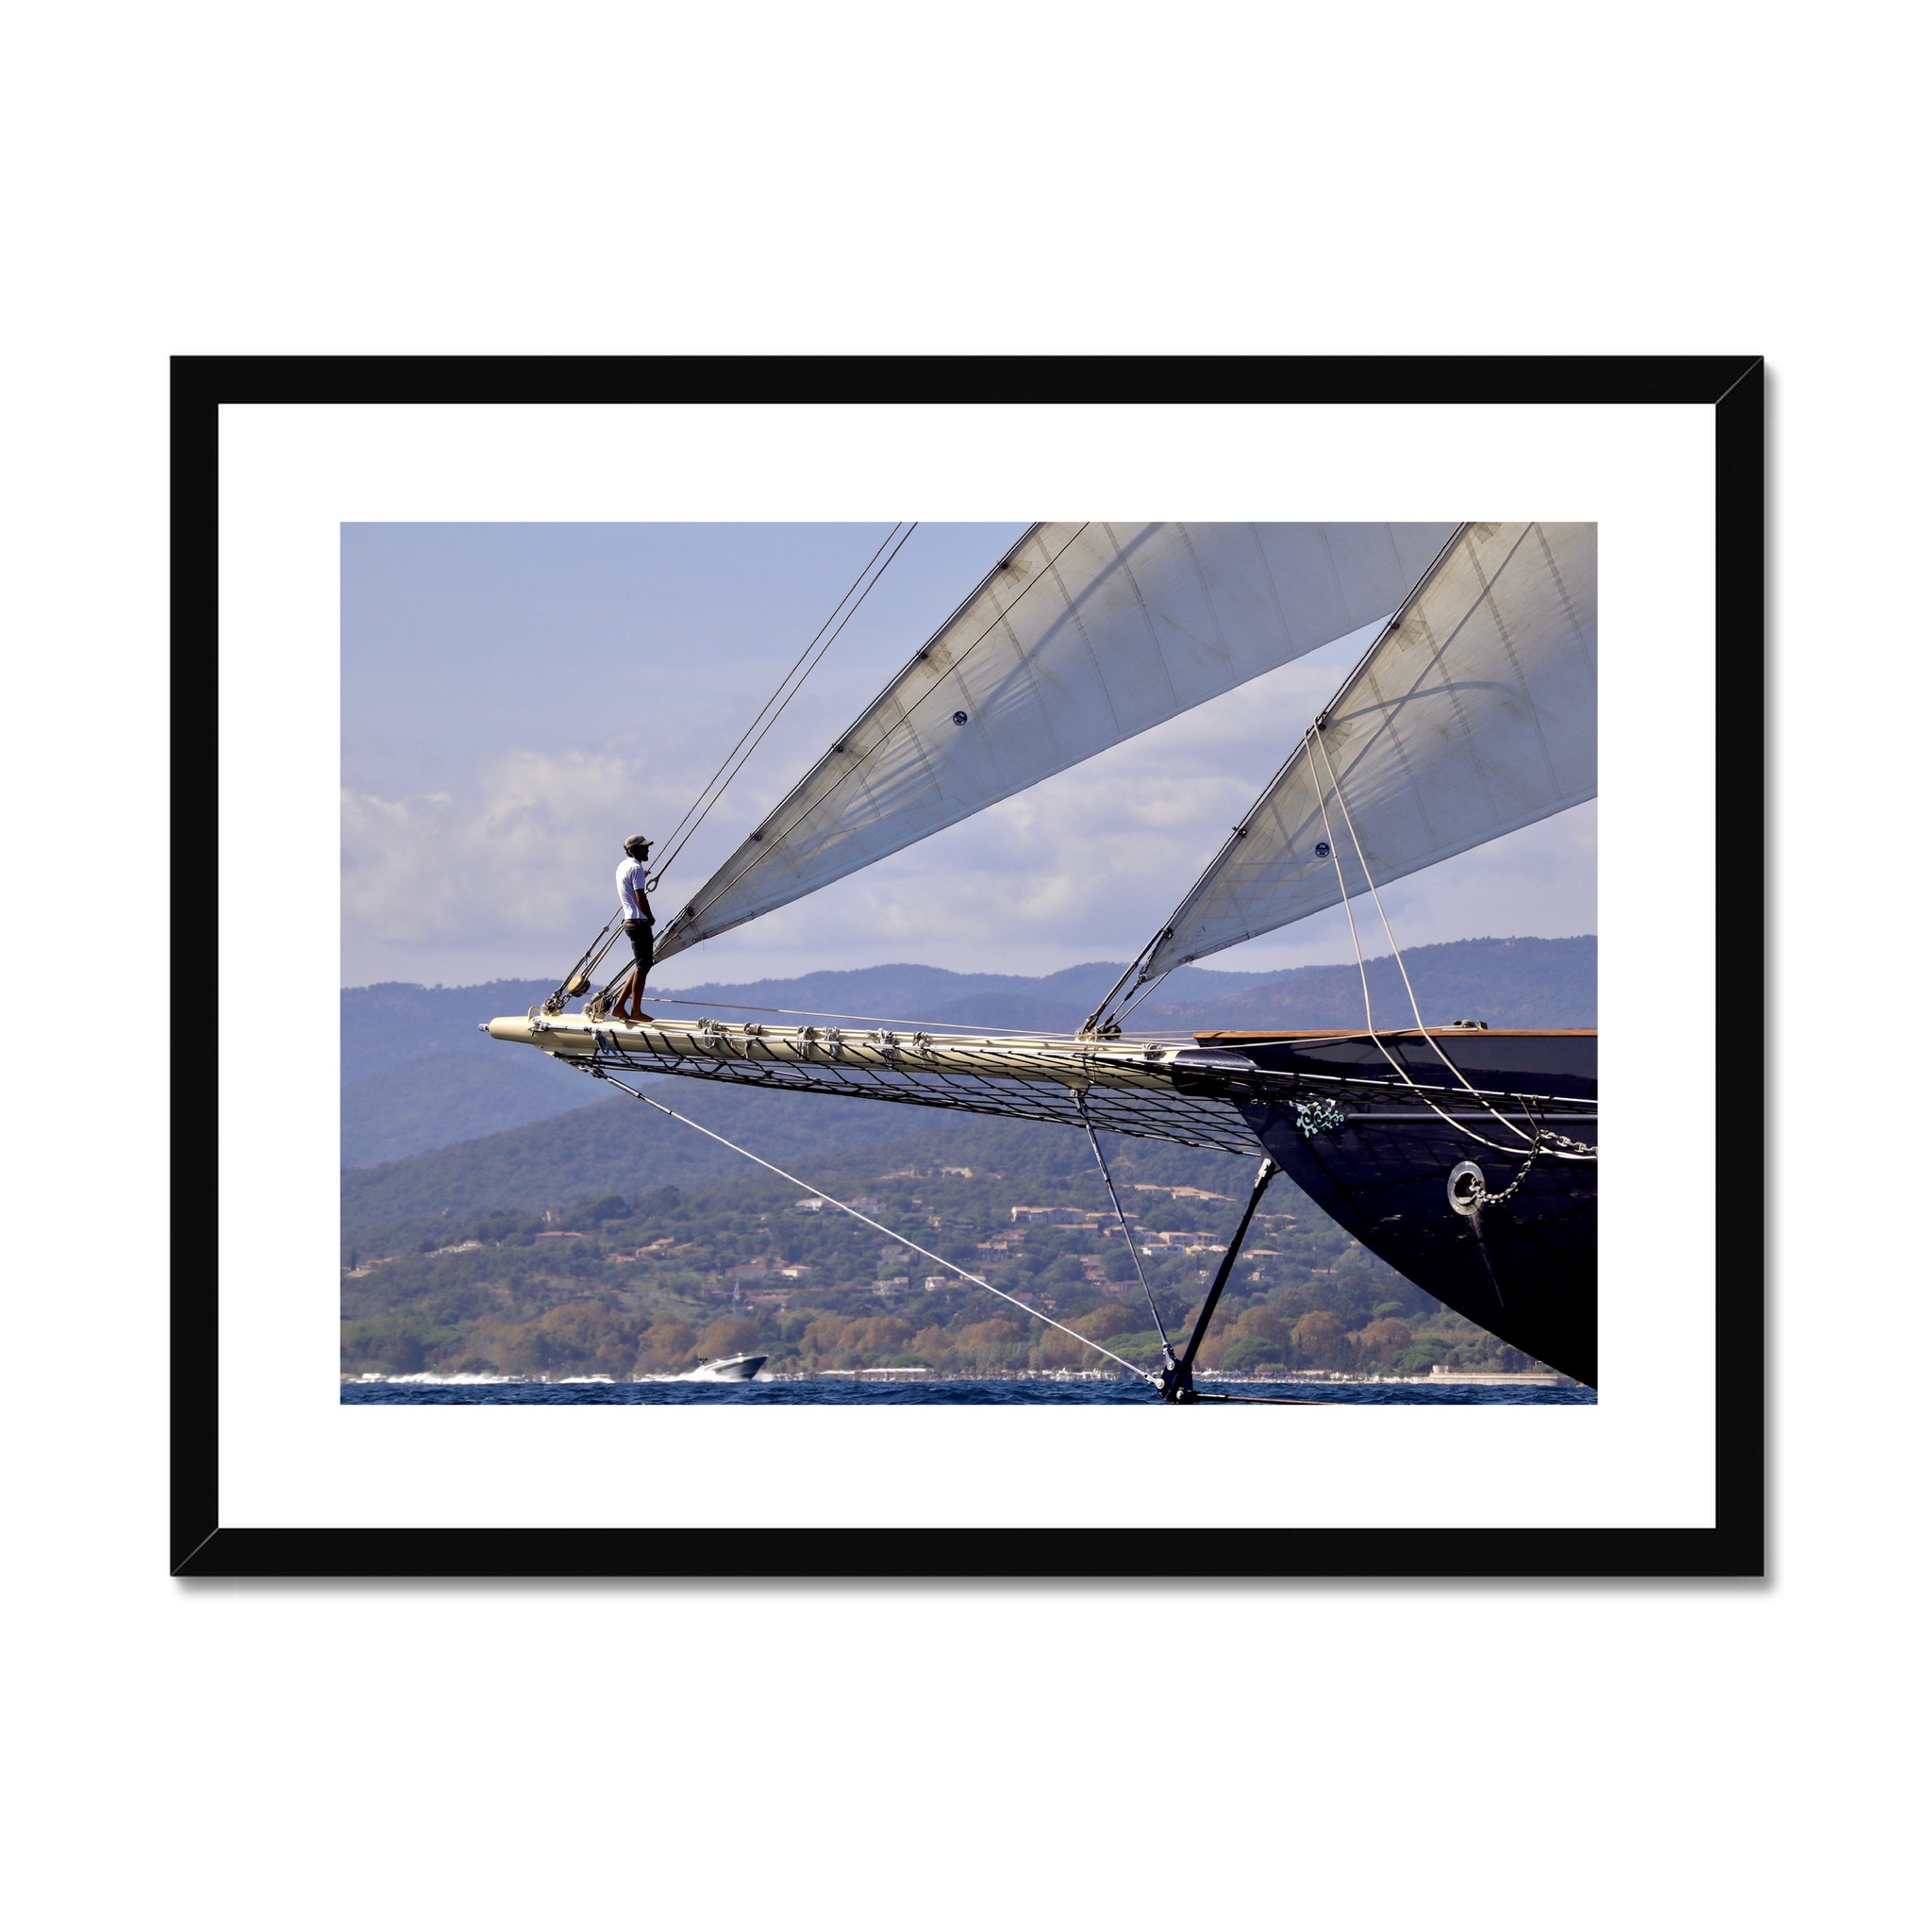 South of France Photos framed print - Man standing on the end of a sailing yacht at Les Voiles de Saint Tropez